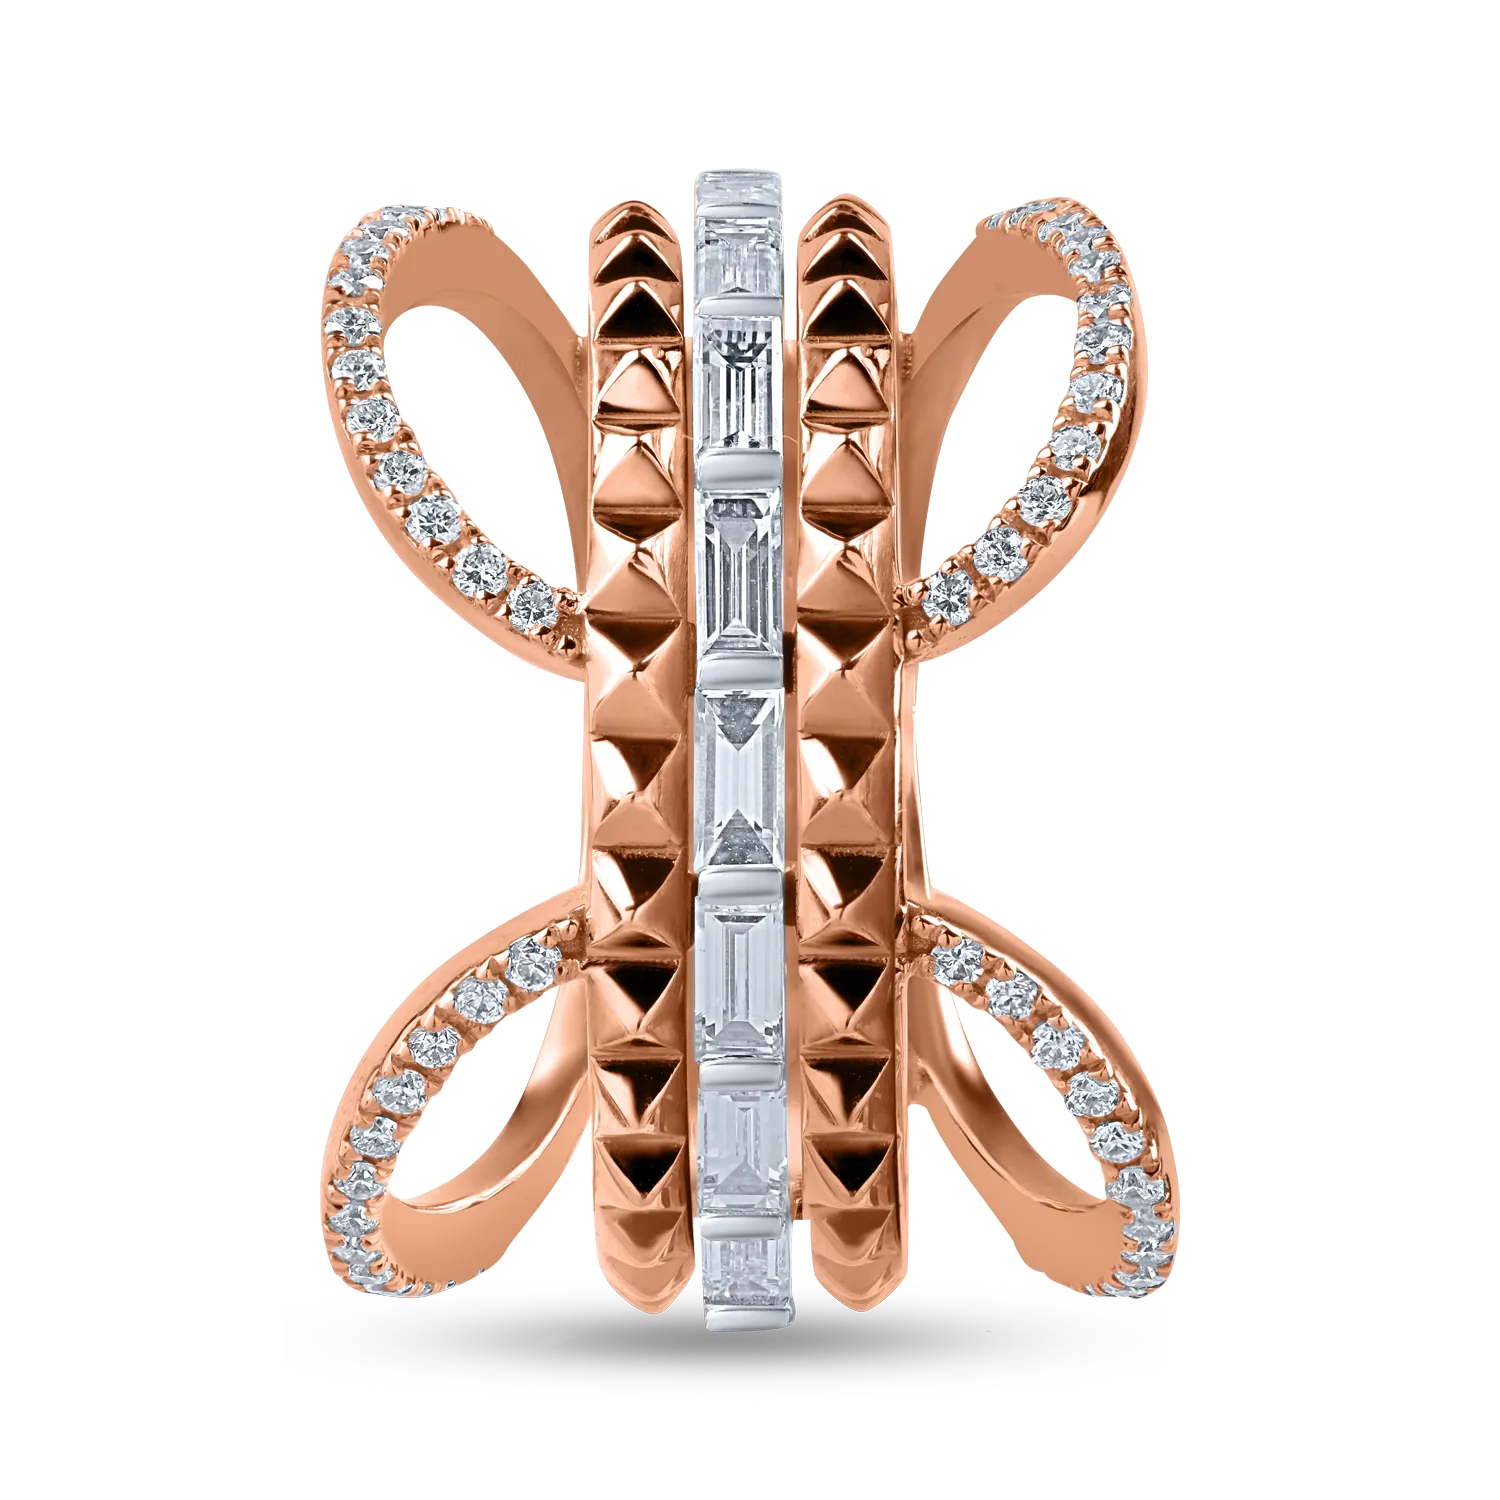 Rose gold ring with 0.96ct diamonds